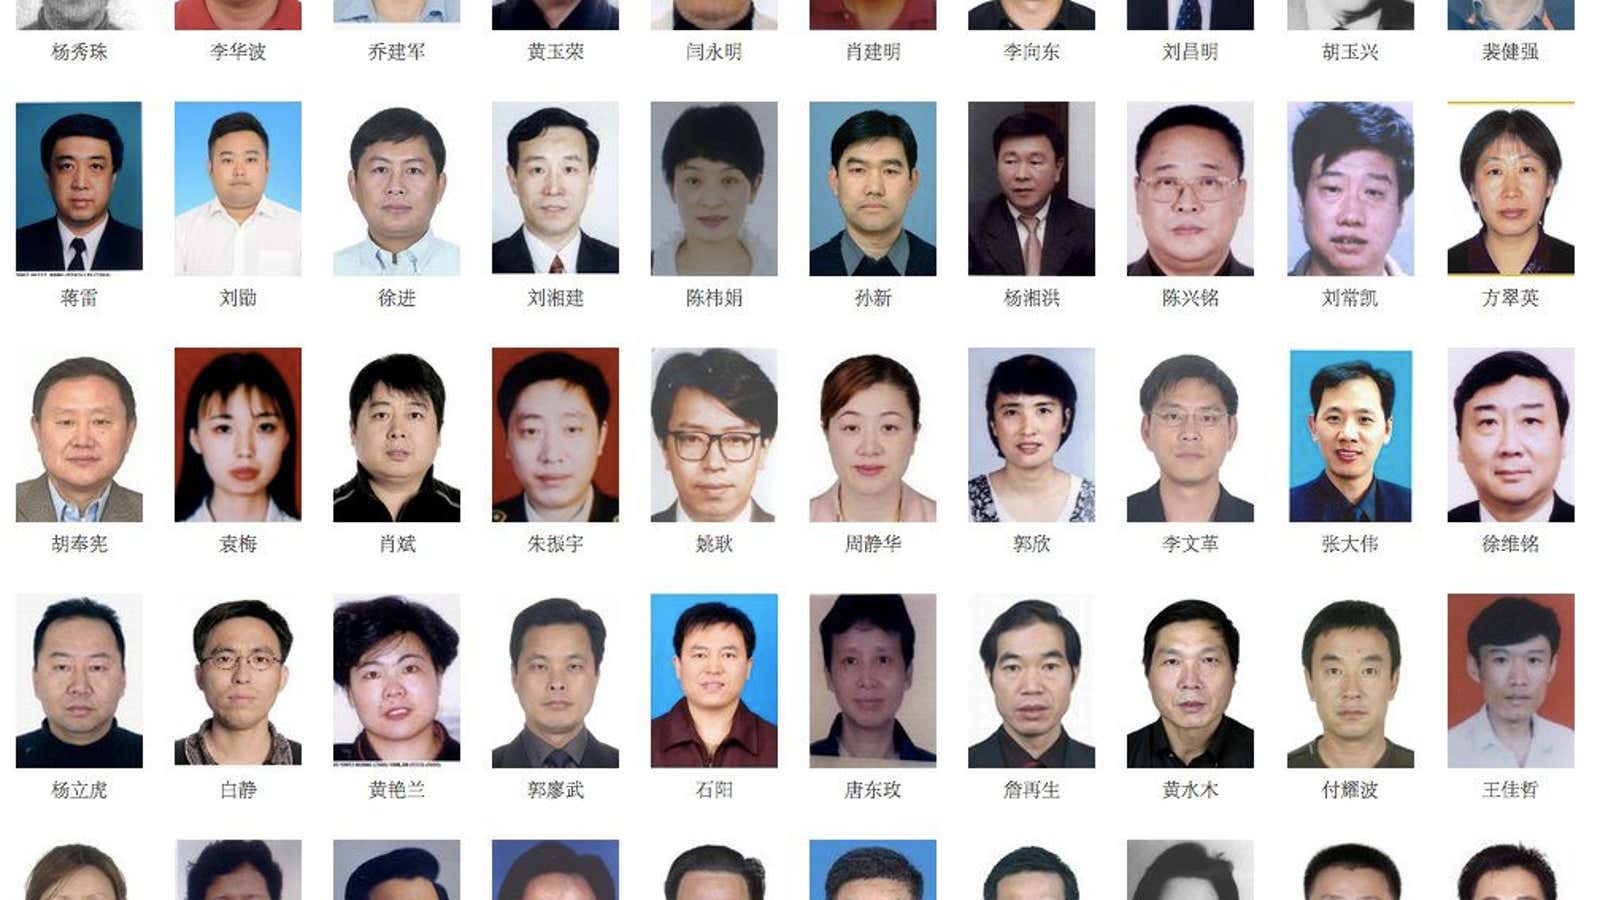 China’s most wanted.